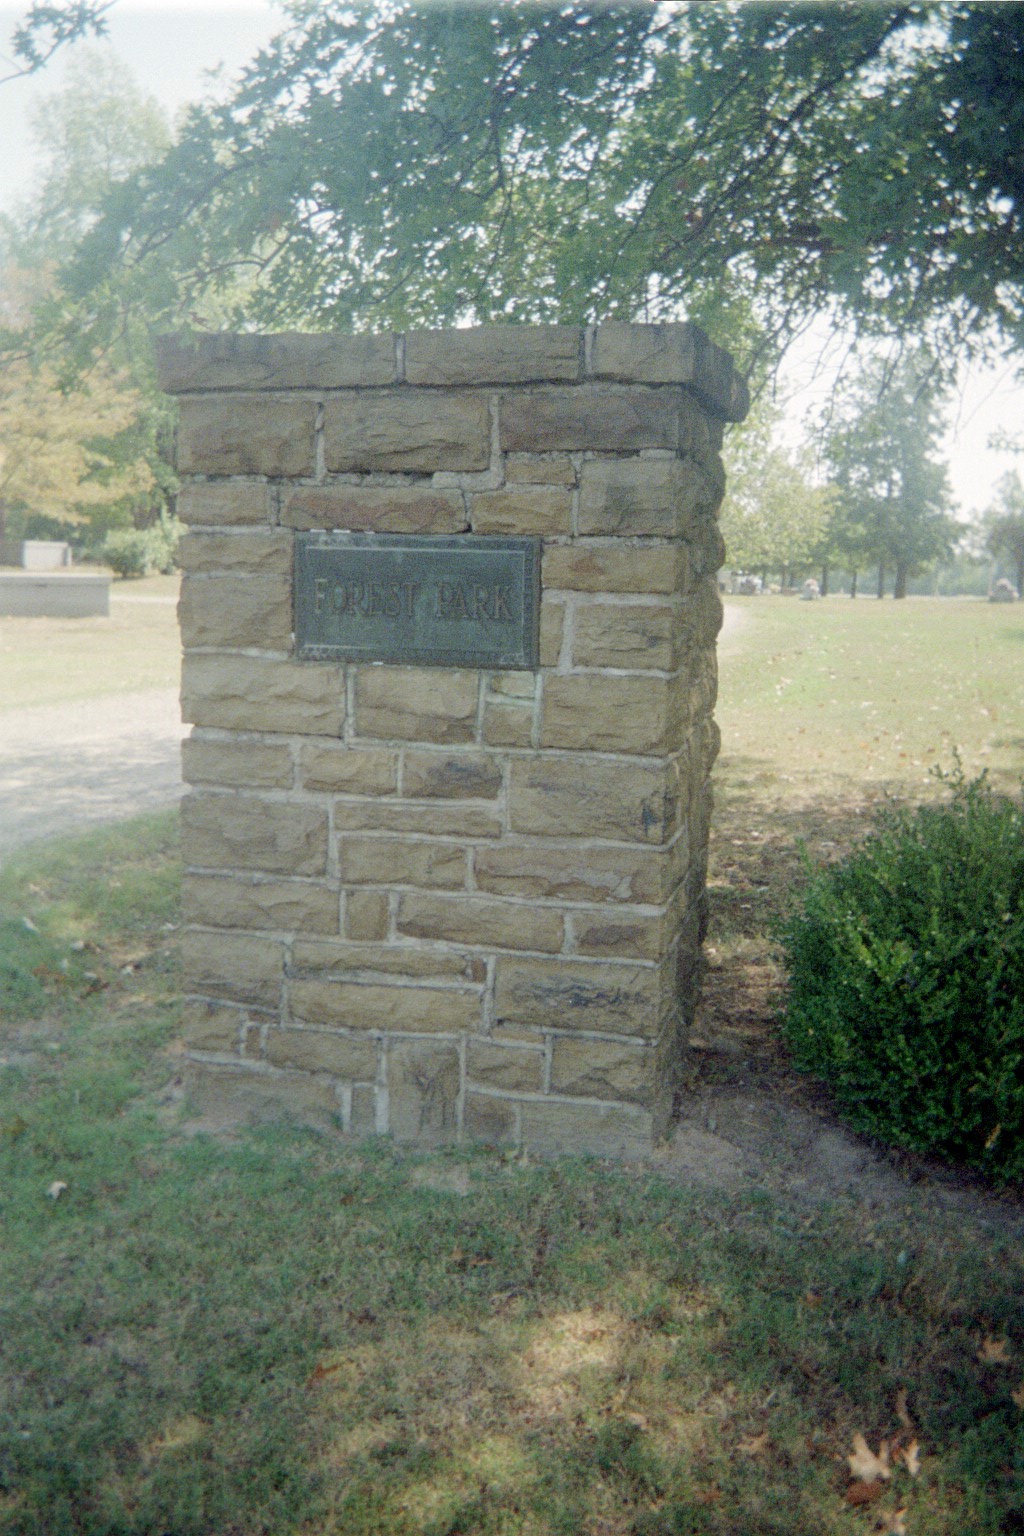 Forest Park Cemetery sign